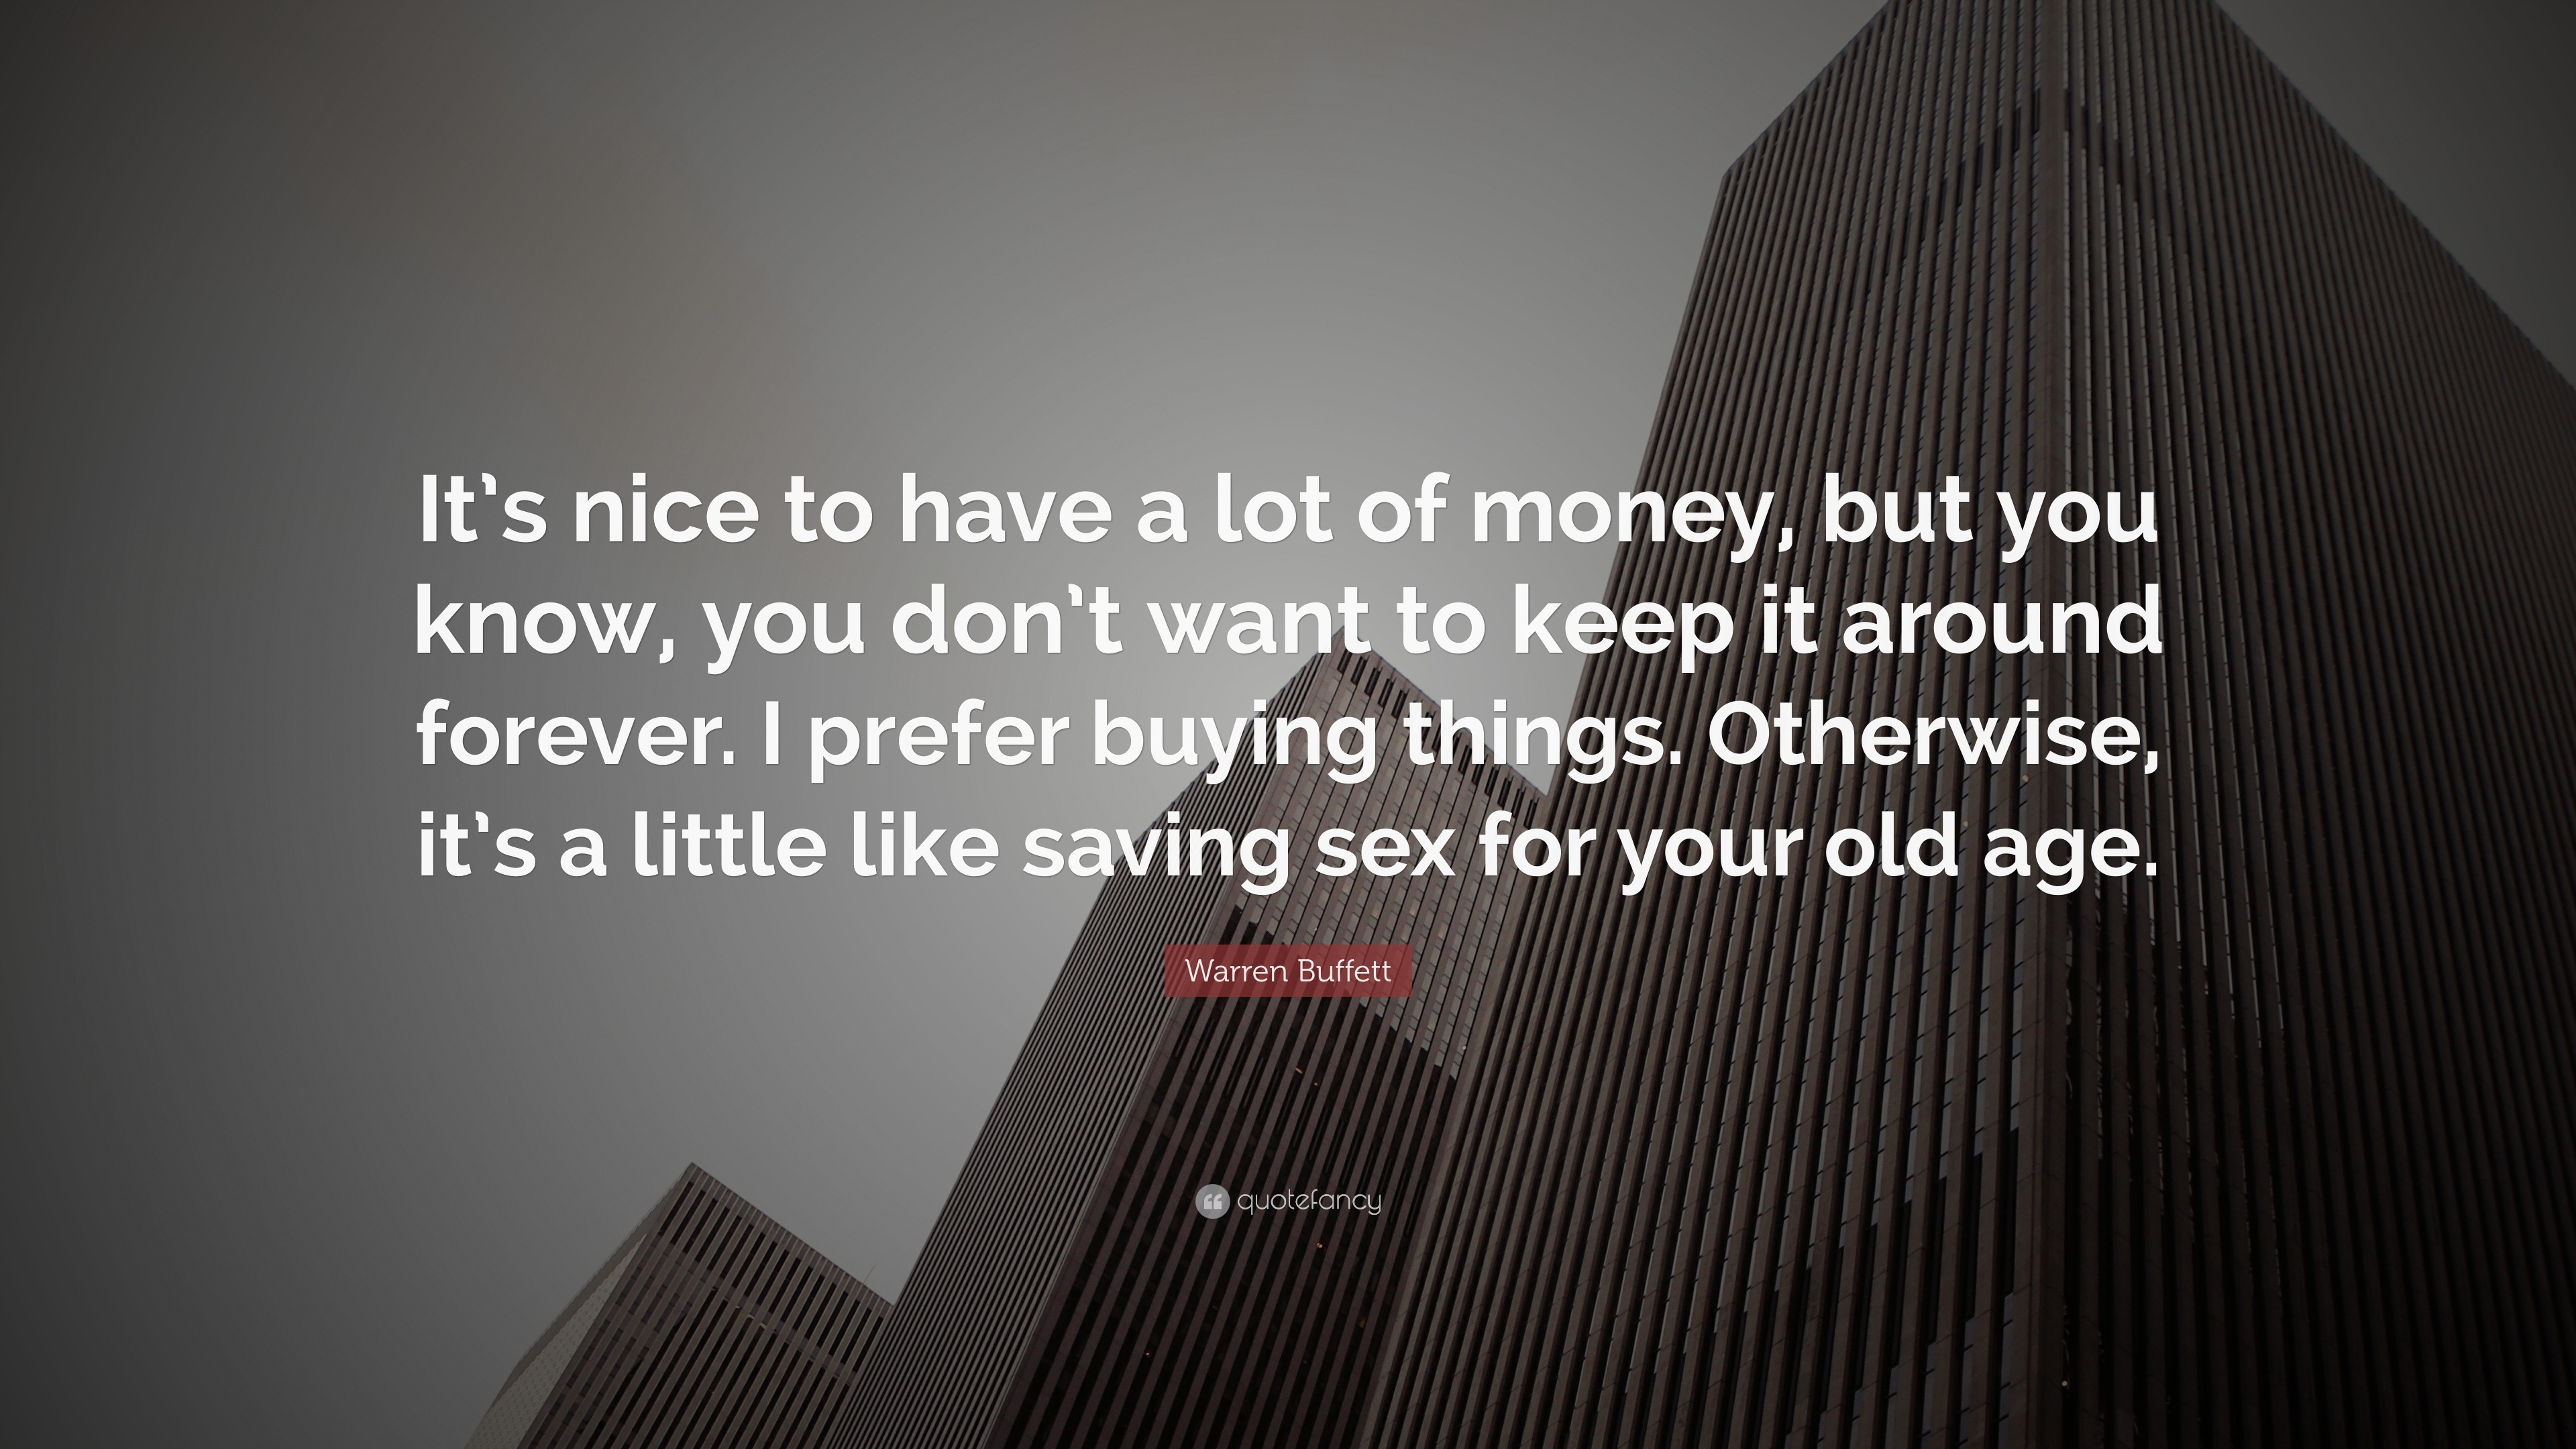 Warren Buffett Quote It S Nice To Have A Lot Of Money But You Know You Don T Want To Keep It Around Forever I Prefer Buying Things Otherw